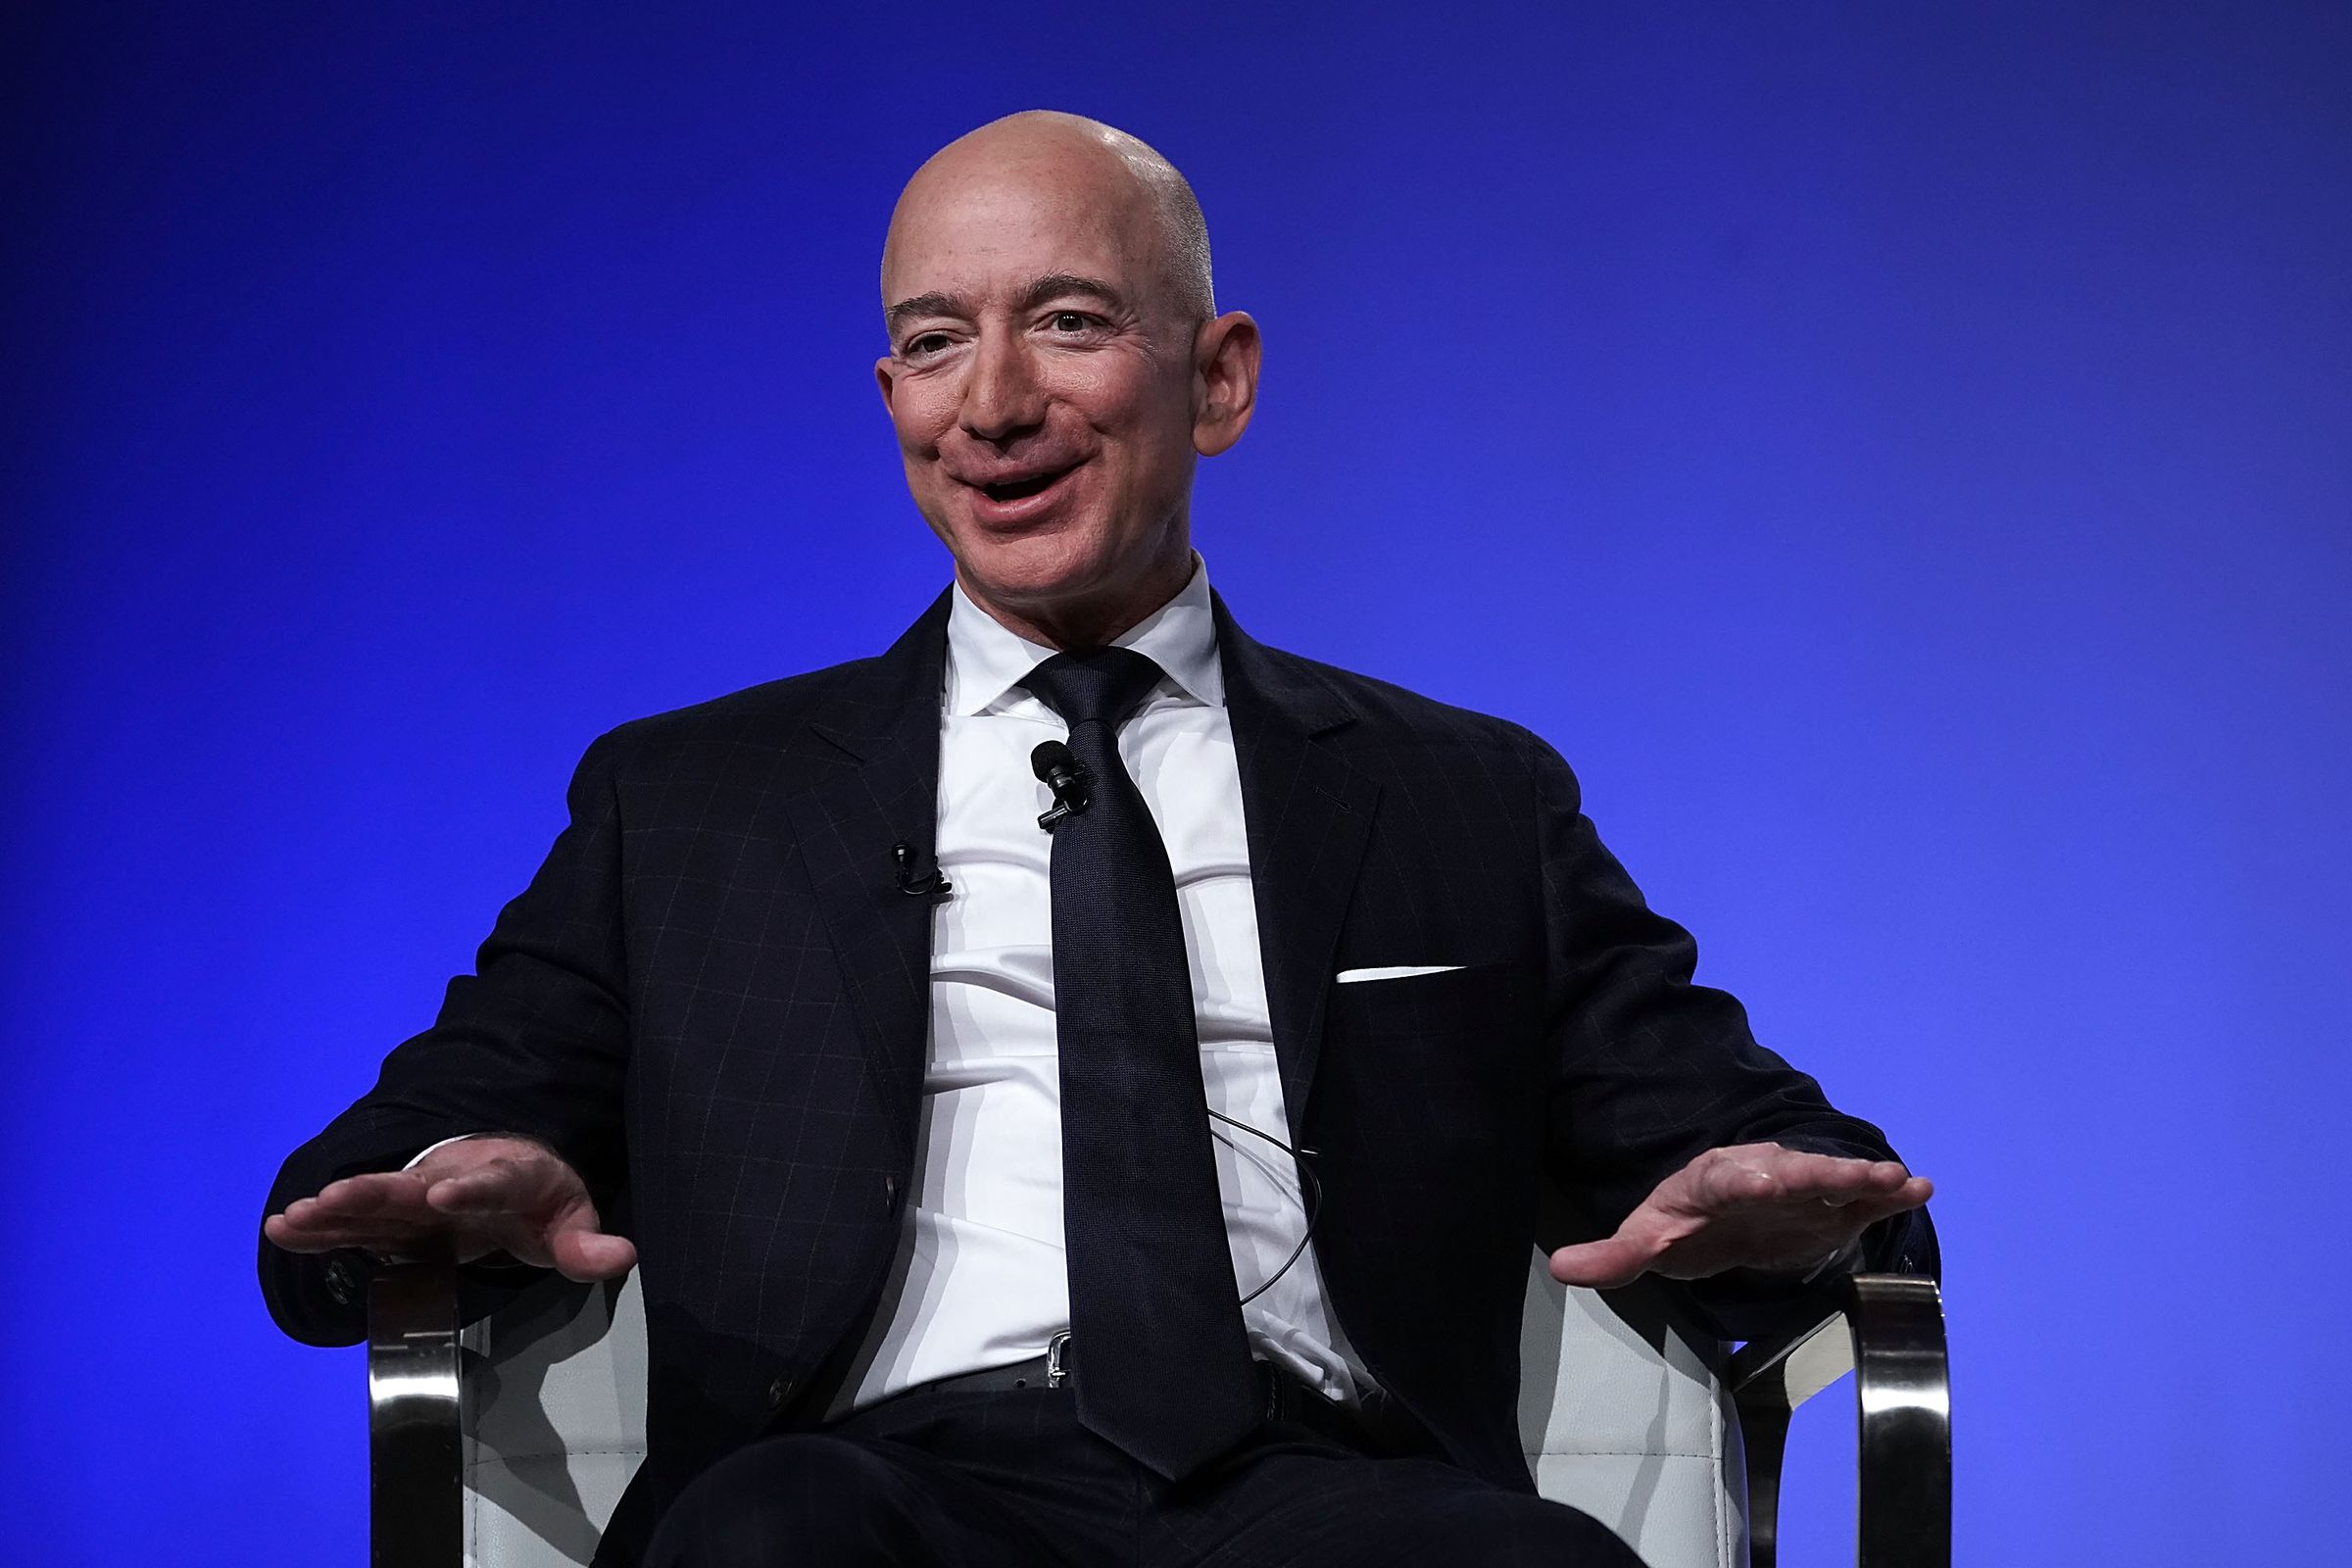 Amazon CEO And Blue Origin Founder Jeff Bezos Speaks At Air Force Association Air, Space And Cyber Conference